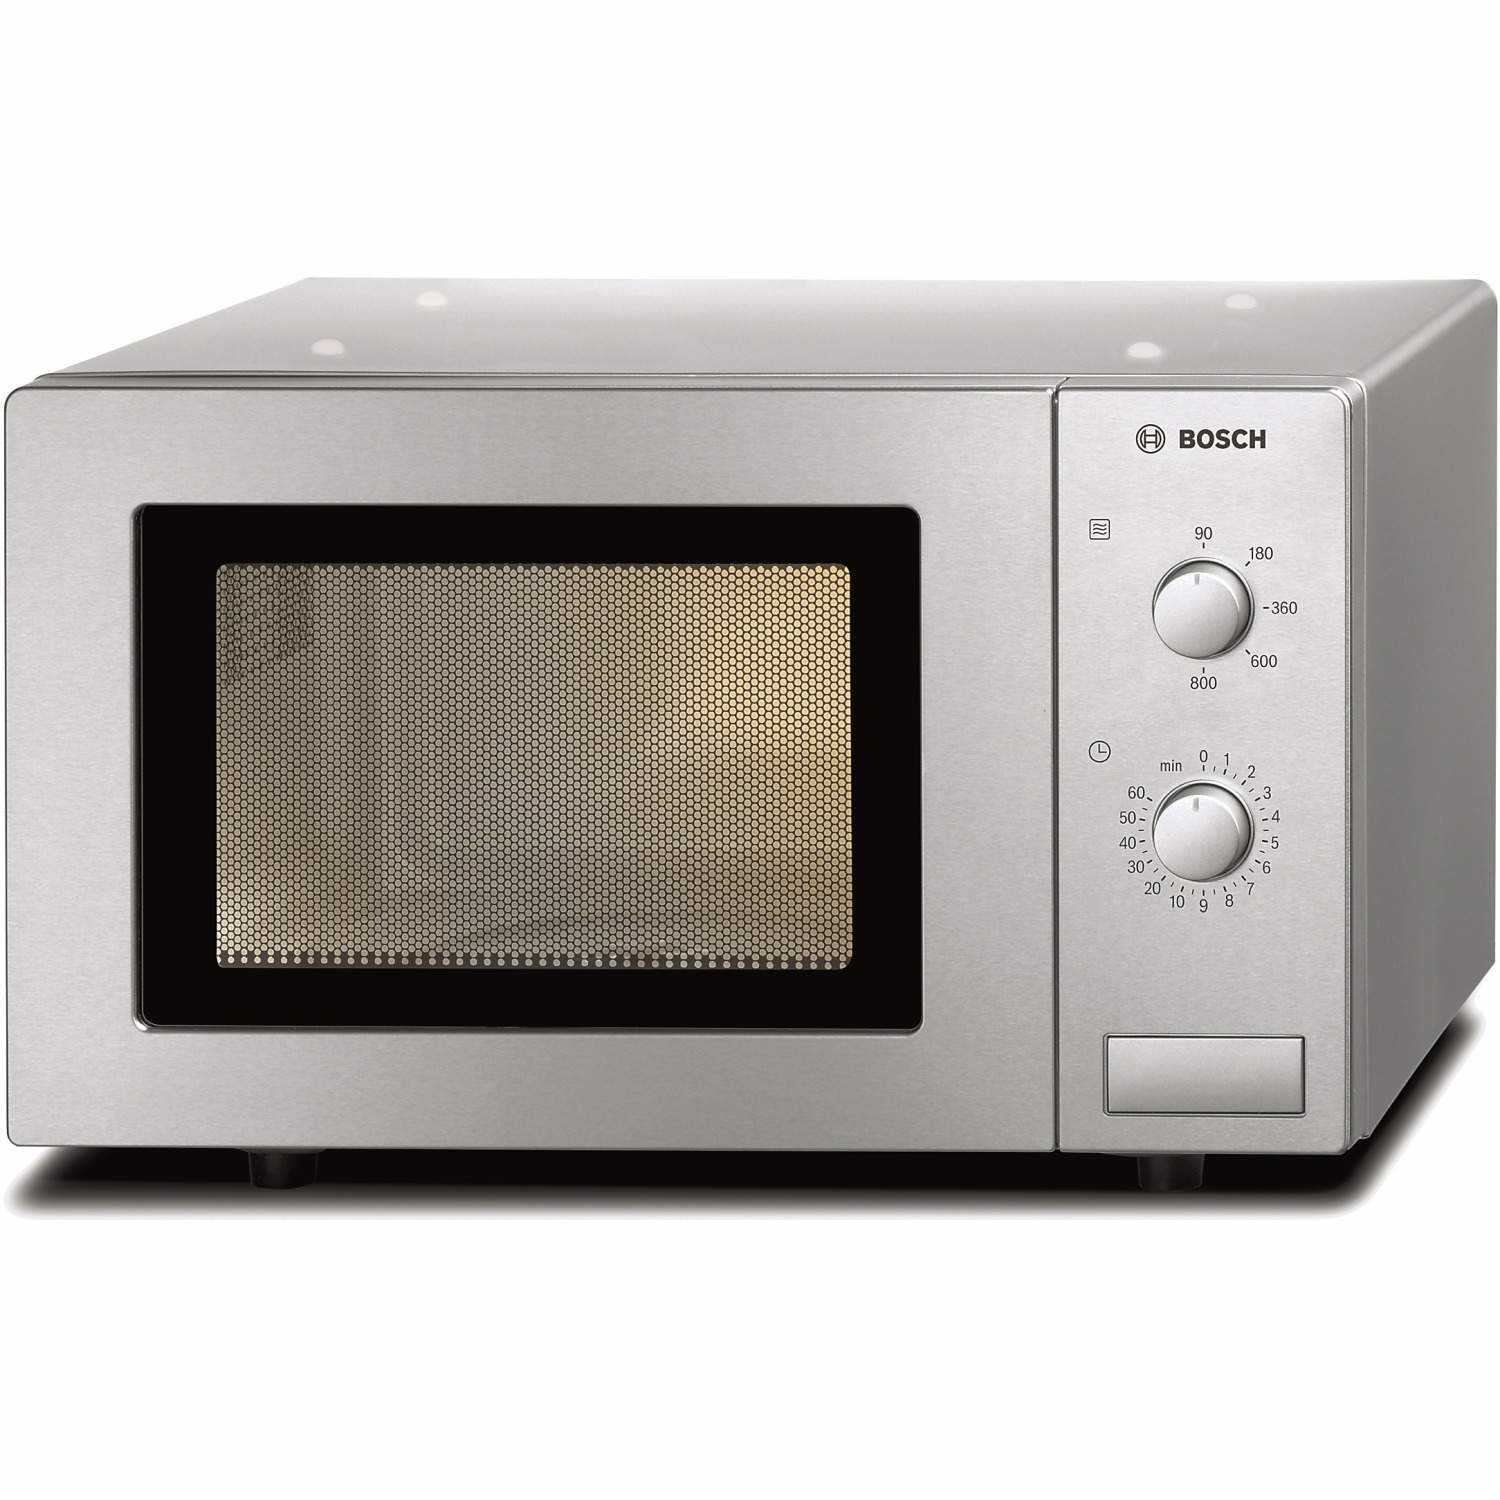 Bosch 17L Microwave - Brushed Steel